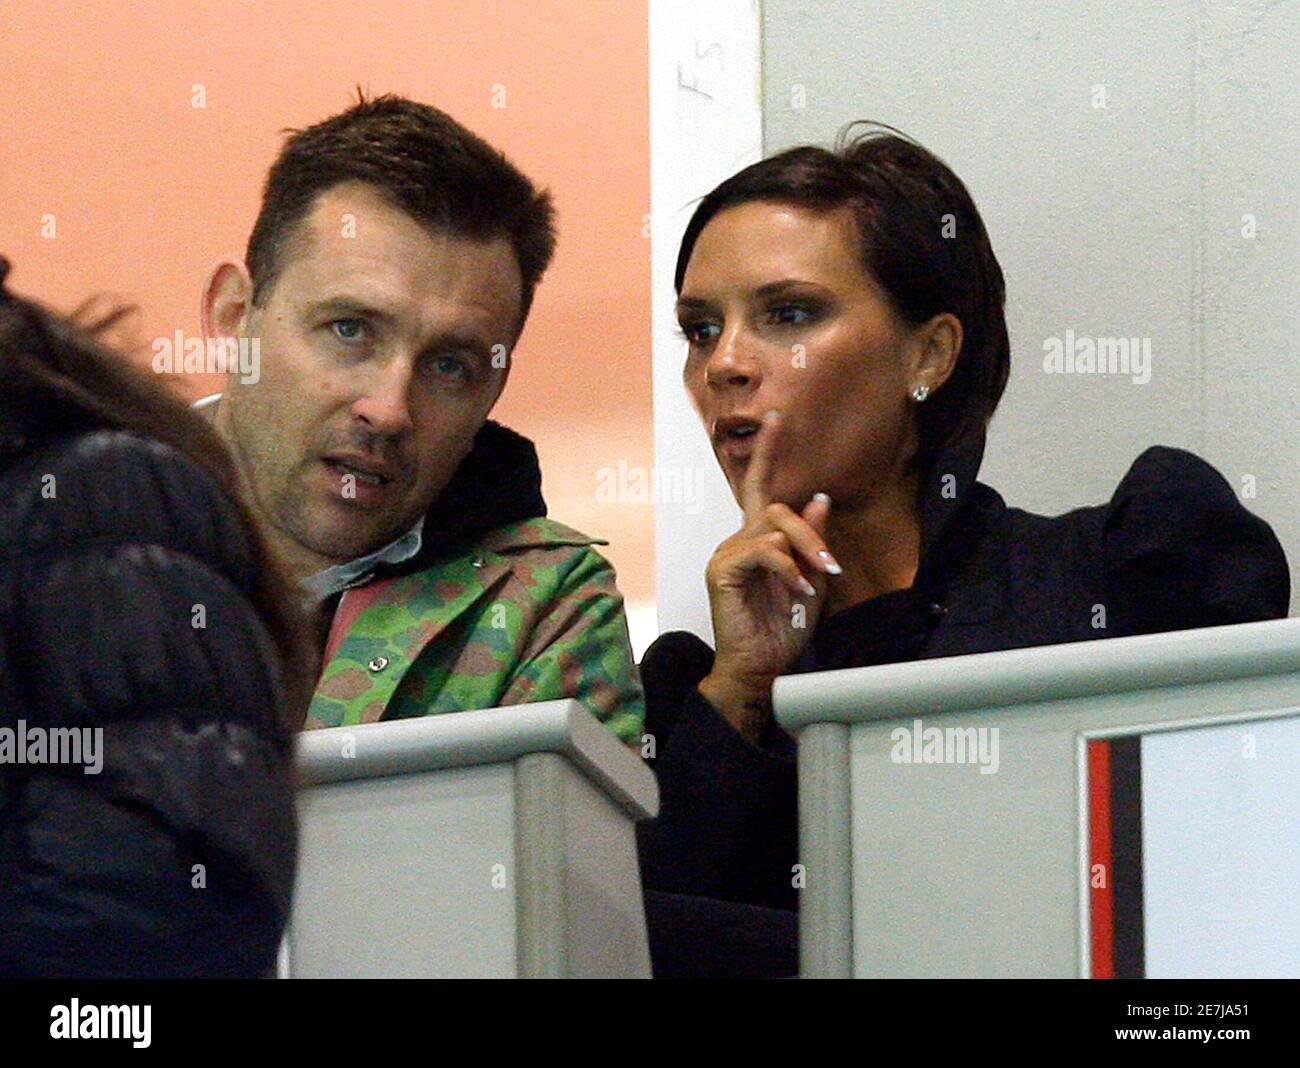 Victoria Beckham (R), wife of AC Milan's David Beckham, talks to a friend  before the start of the Italian Serie A soccer match between AC Milan and  Lecce at the San Siro